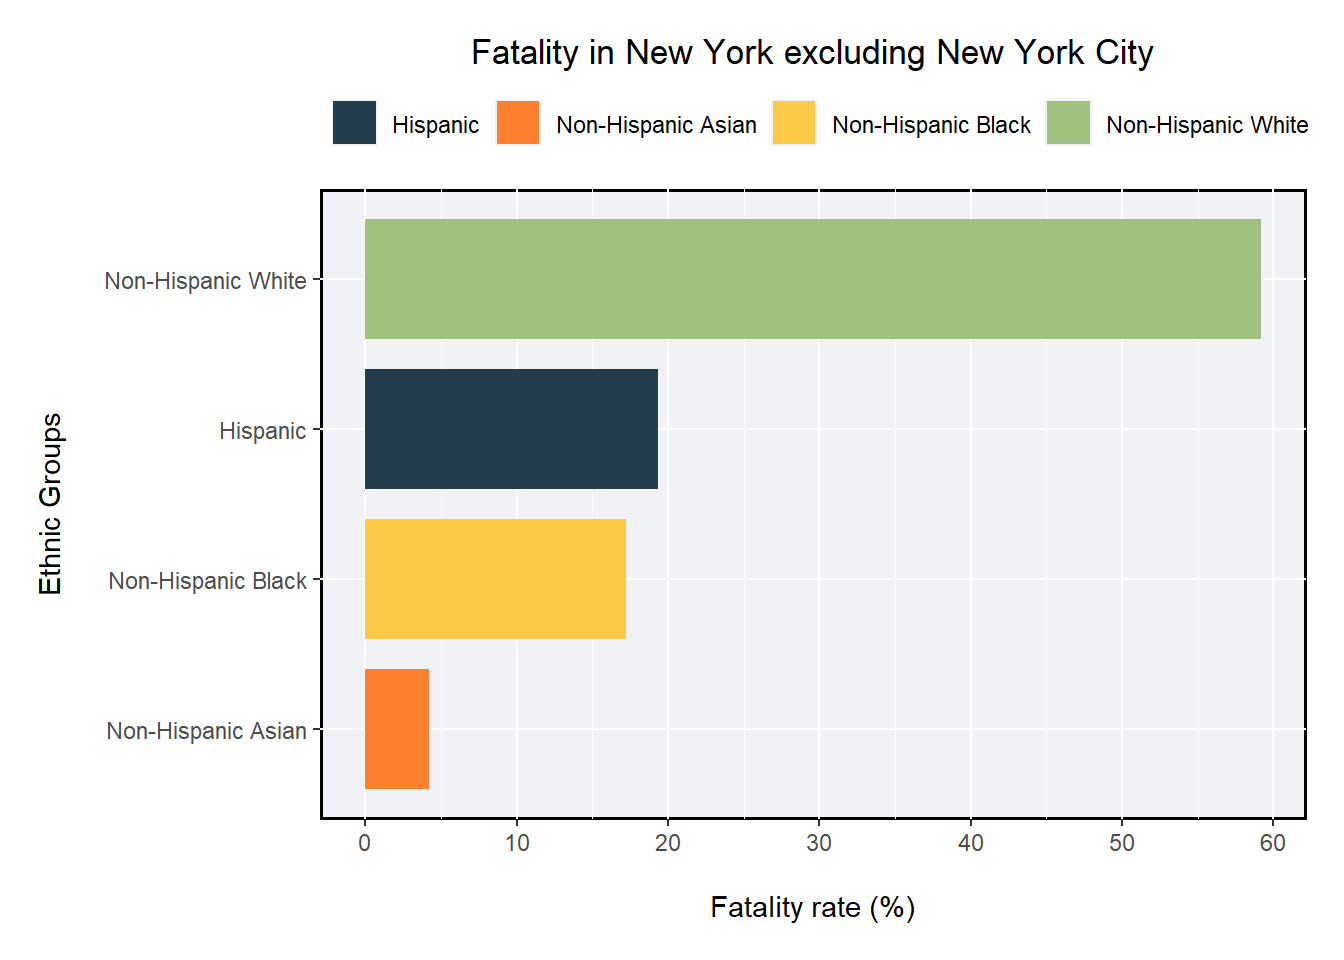 The Bar plot shows the fatality rate in New York excluding New York City. The most affected racial and ethnic group is Non Hispanic White community.